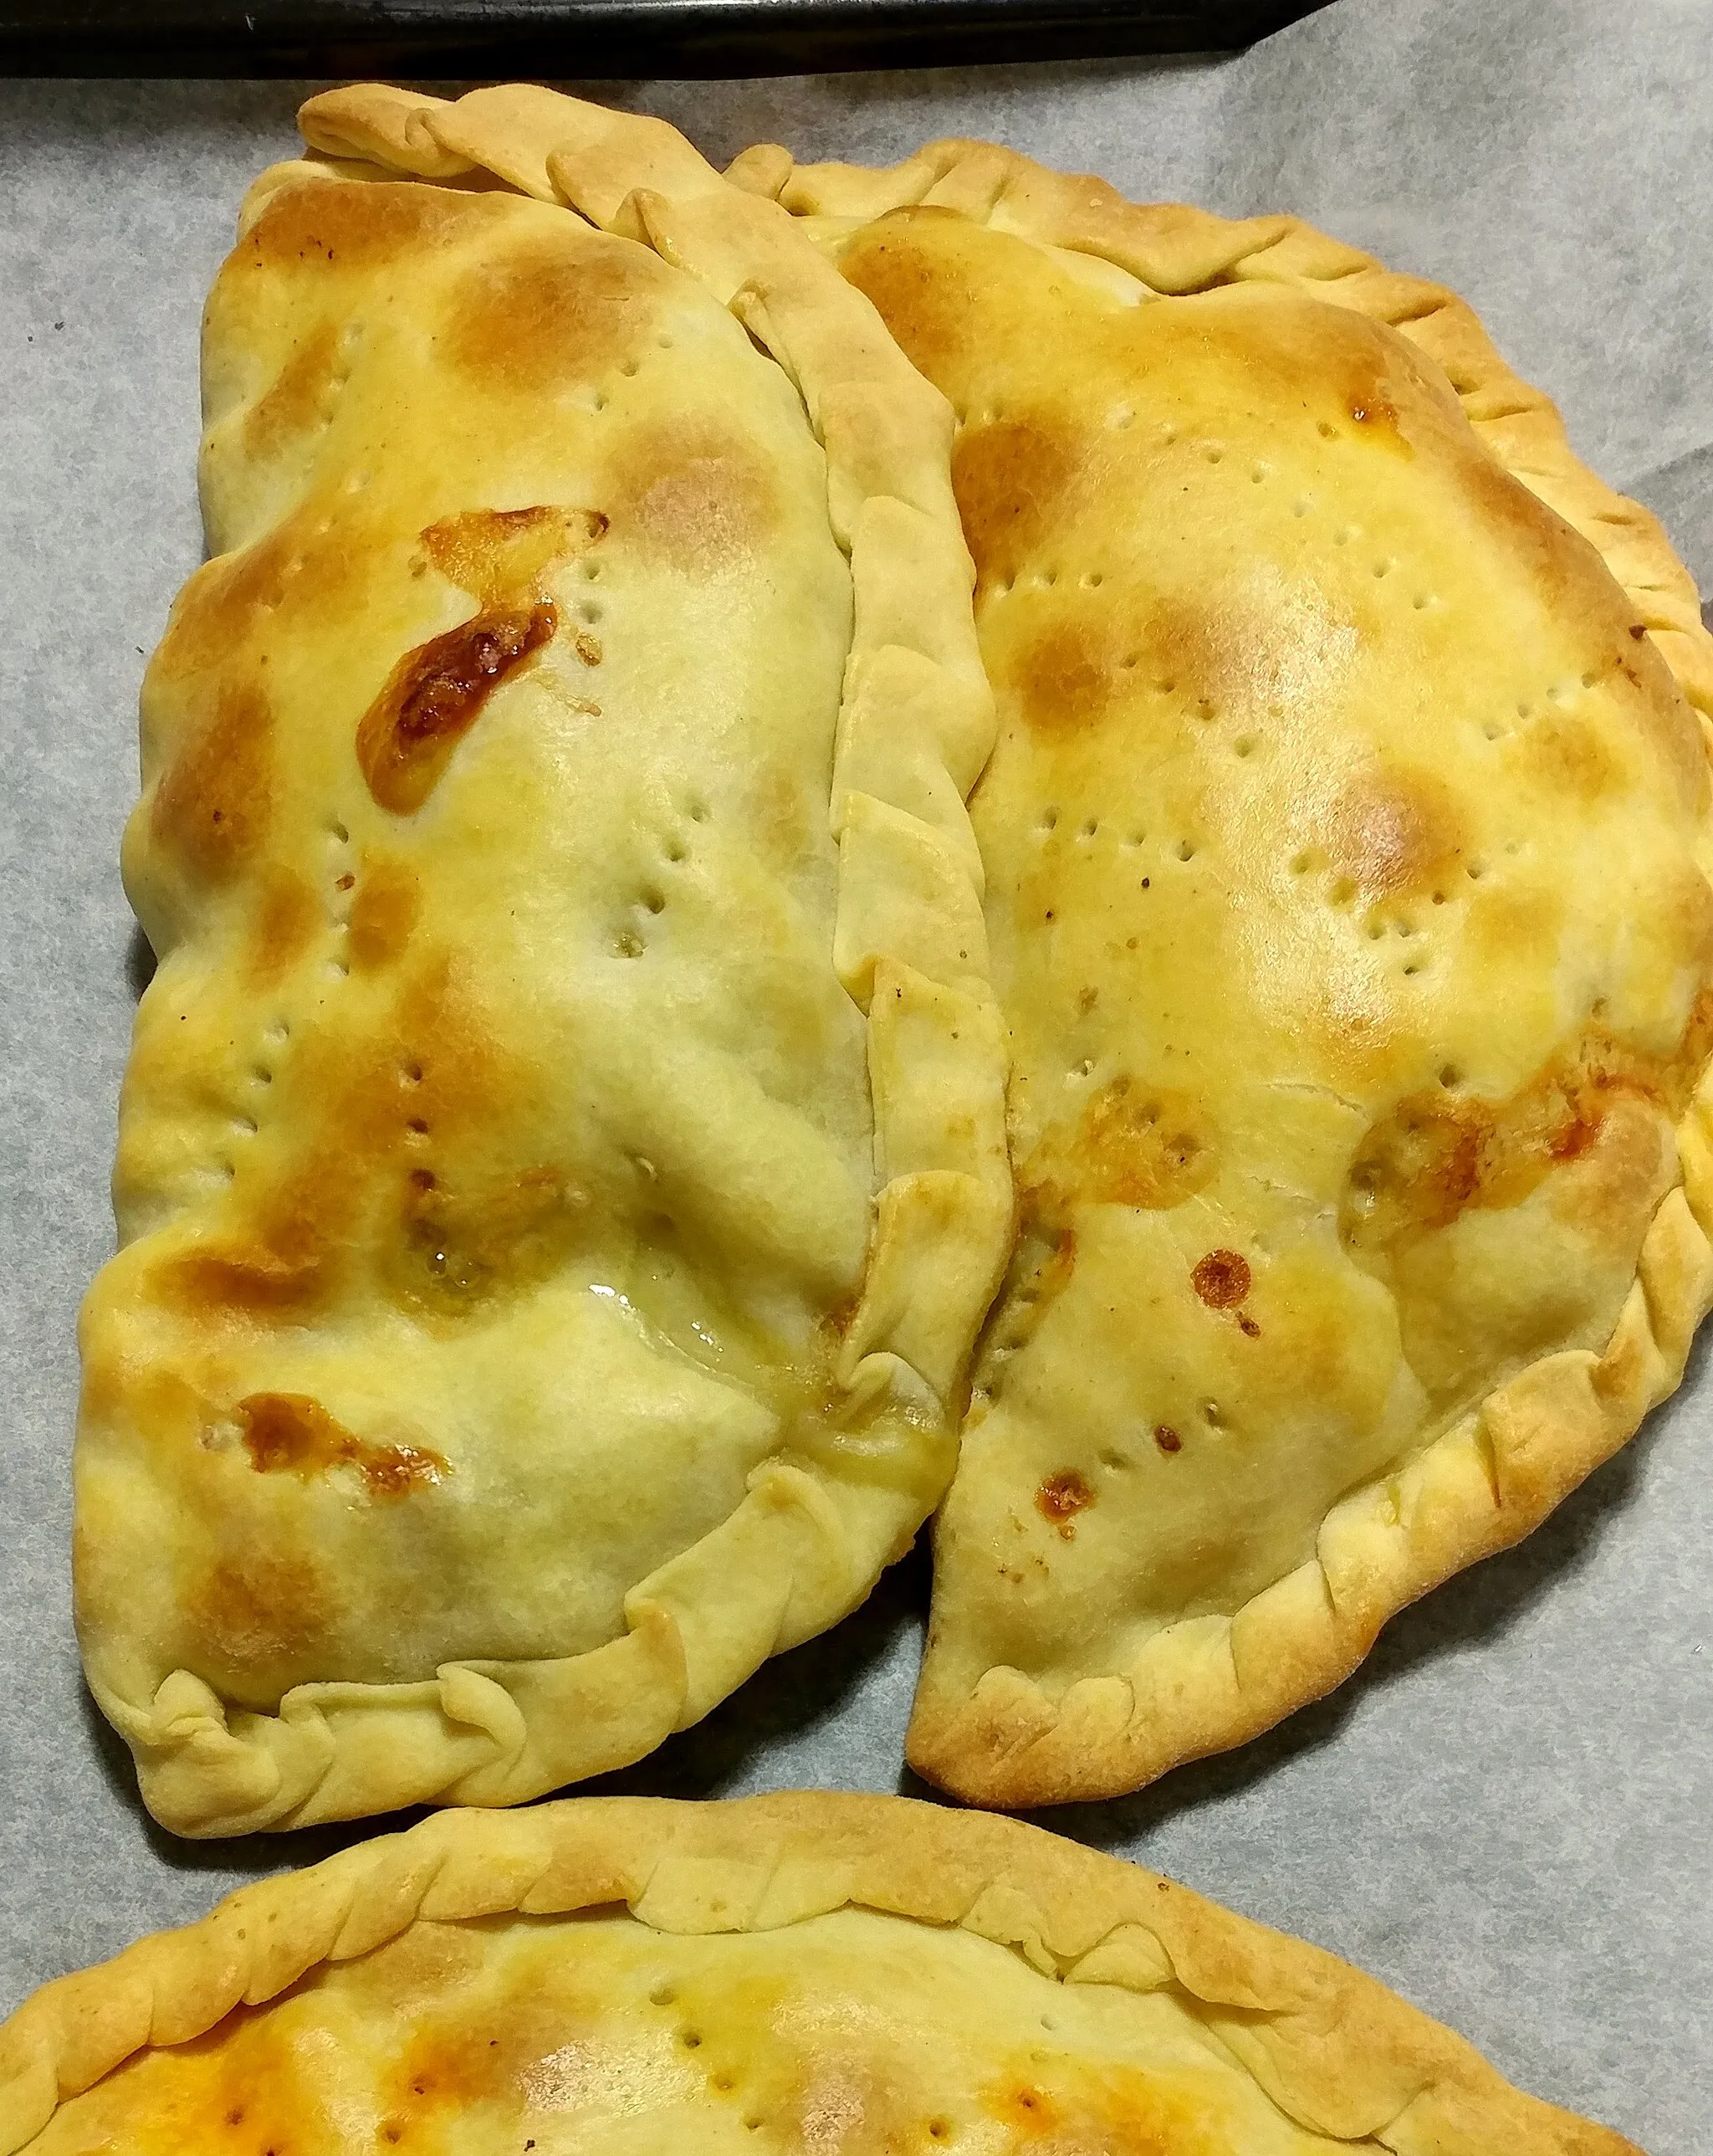 Photo showing: half moon shaped baked good filled with minced meat from Rotondella, Italy